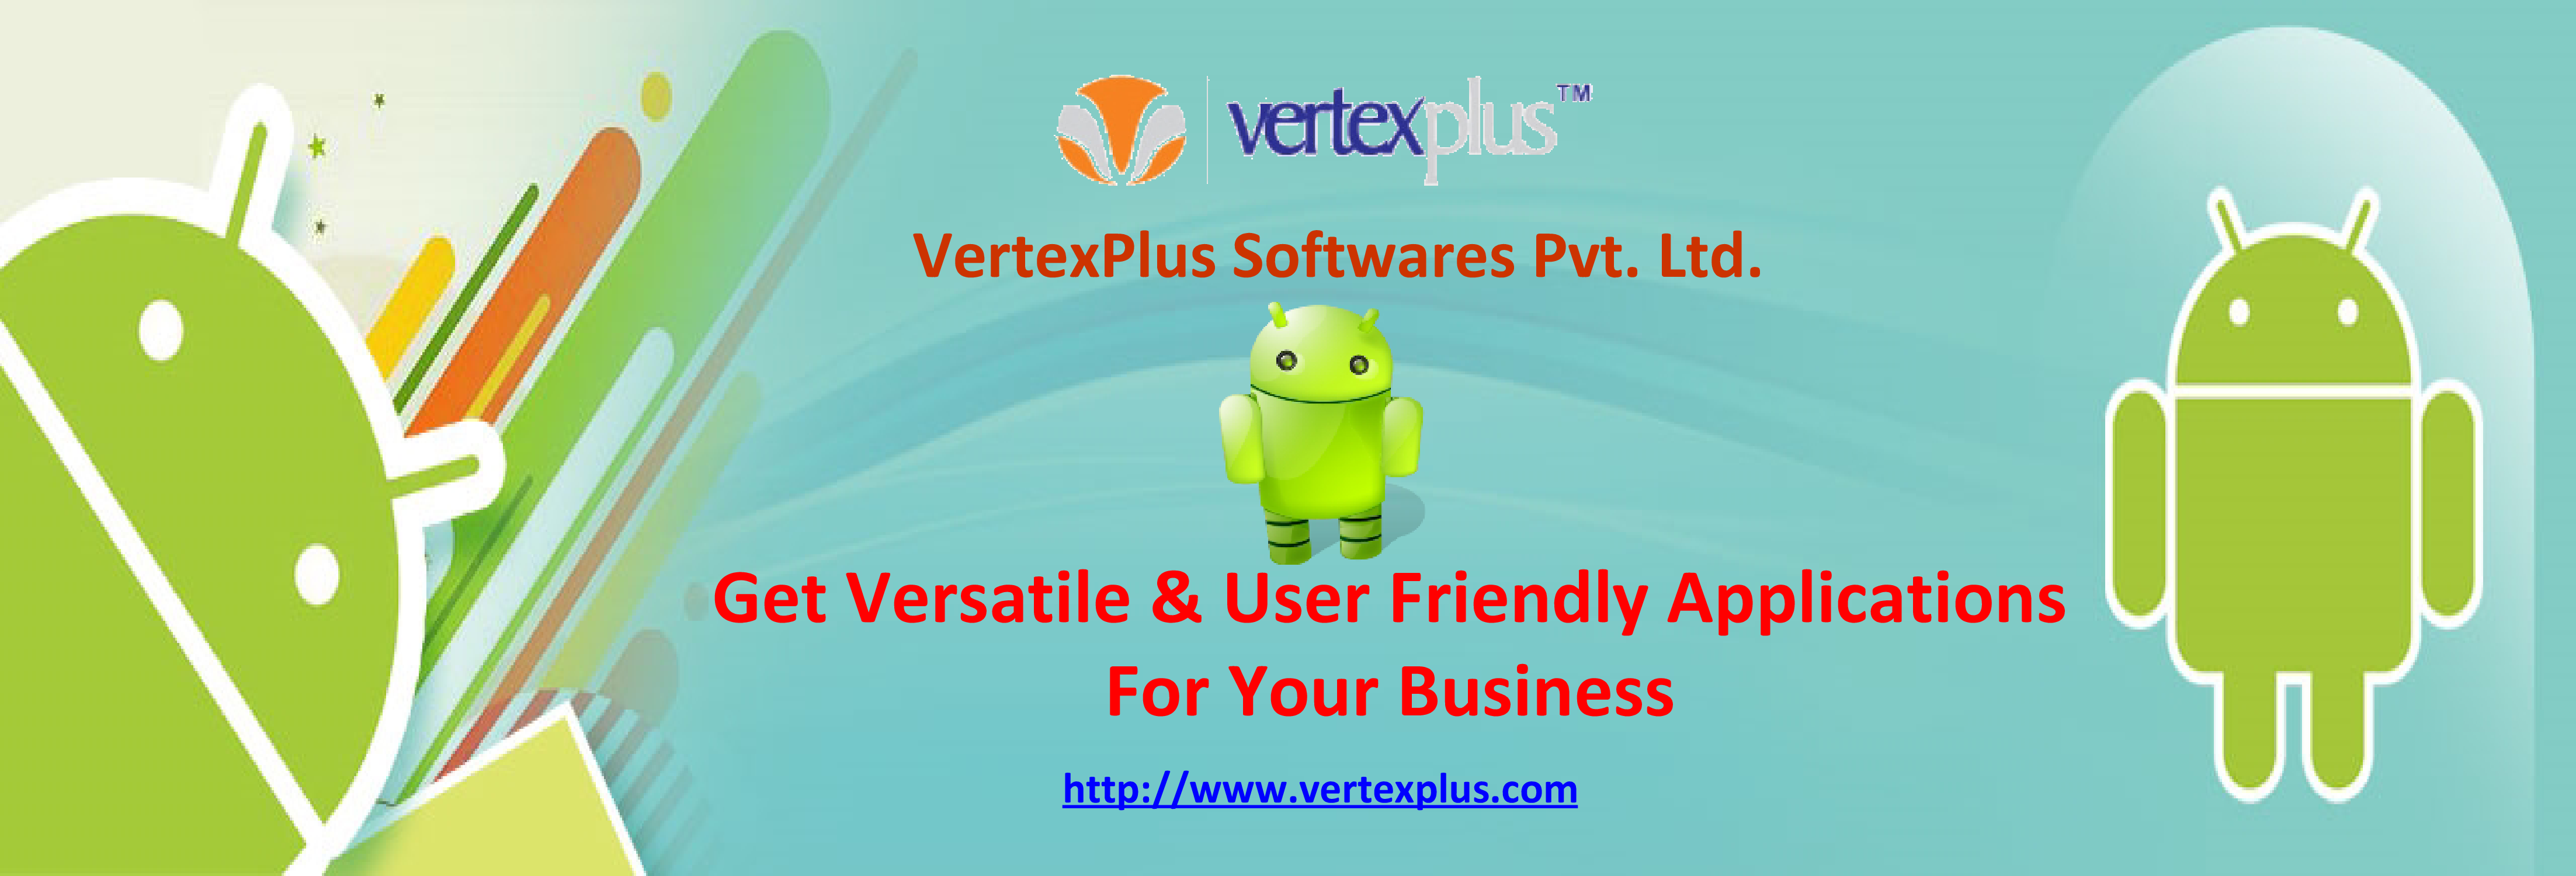 android application development with VertexPlus.png  by vertexplus